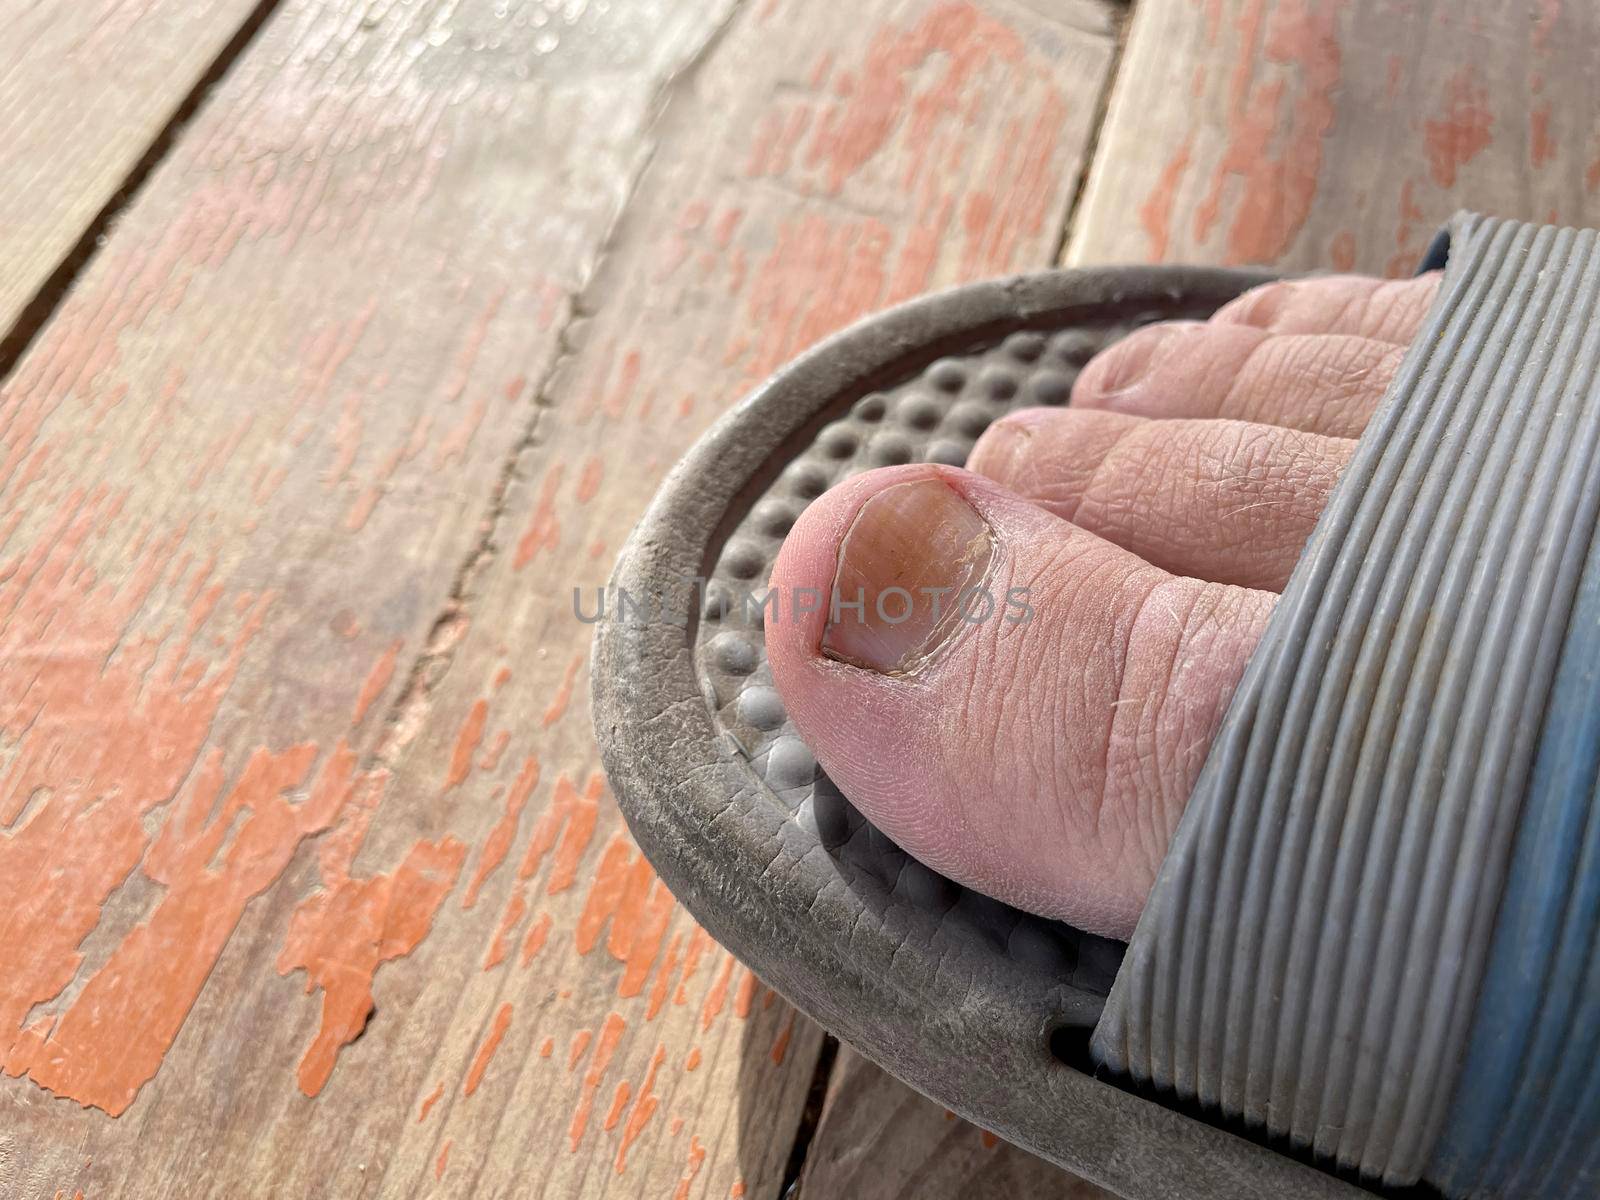 Fungus-damaged nails on the right foot